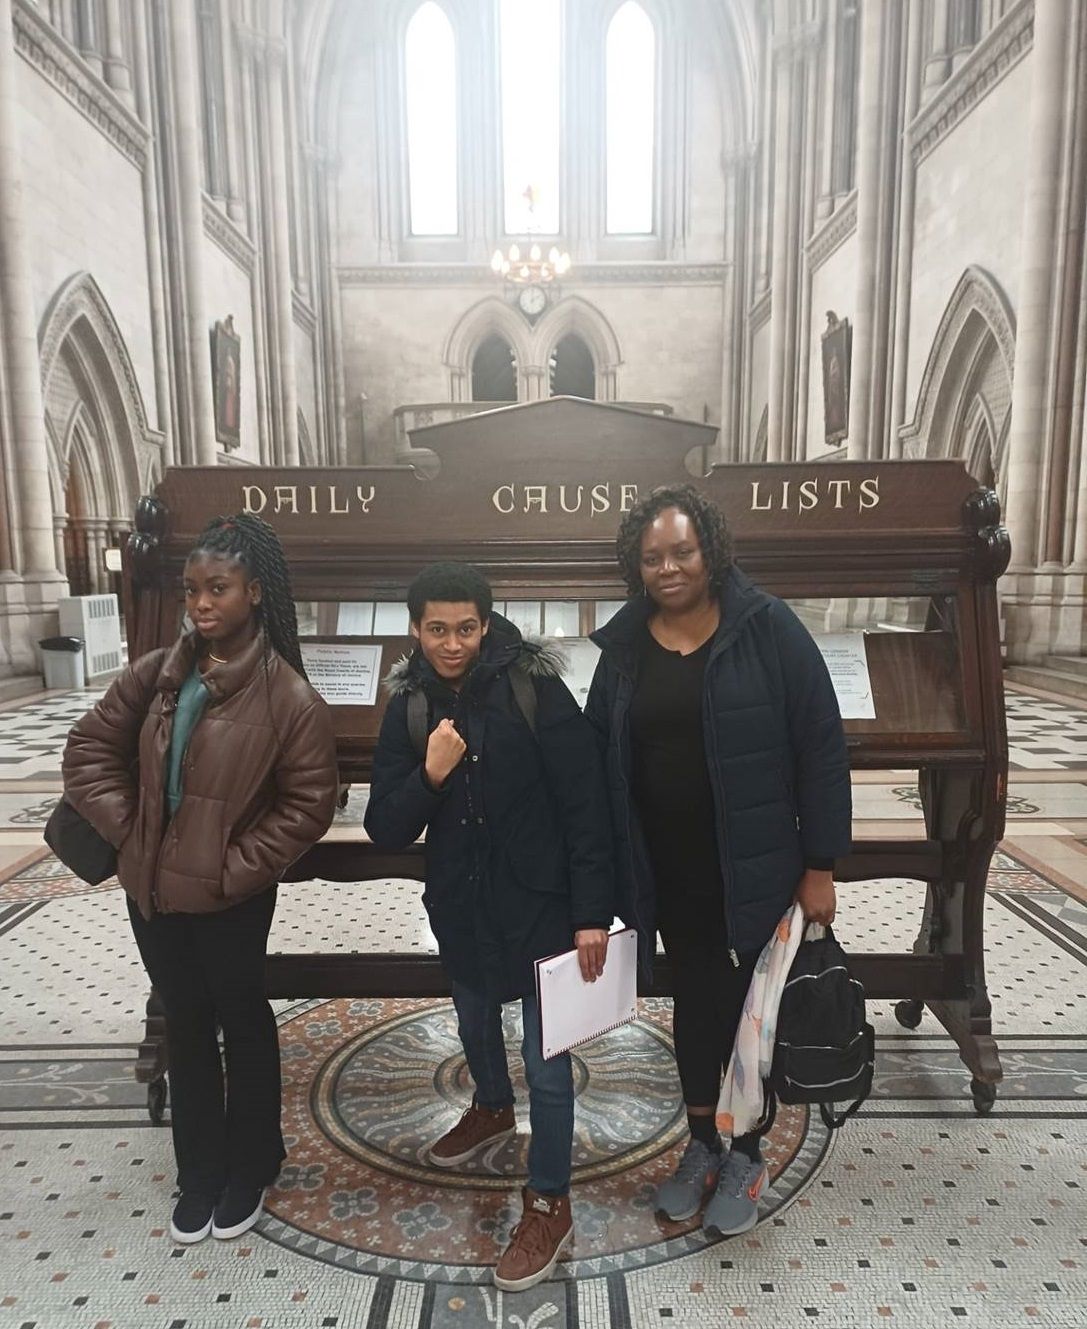 BNU Law students at the Royal Courts of Justice in London